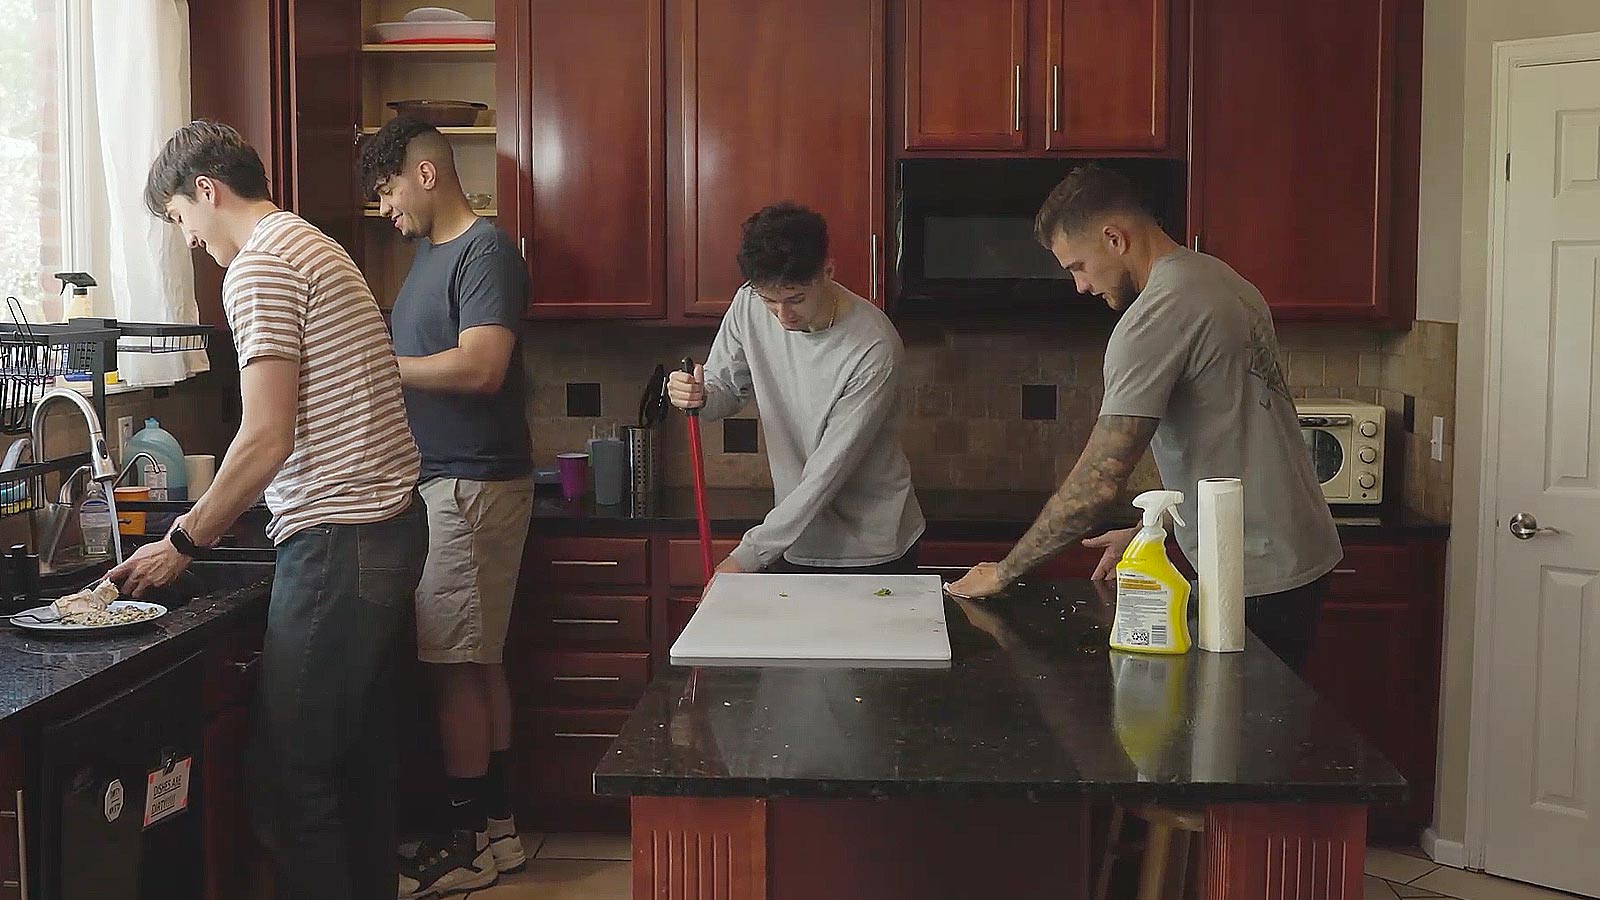 Four men preparing food and cleaning in a modern kitchen.